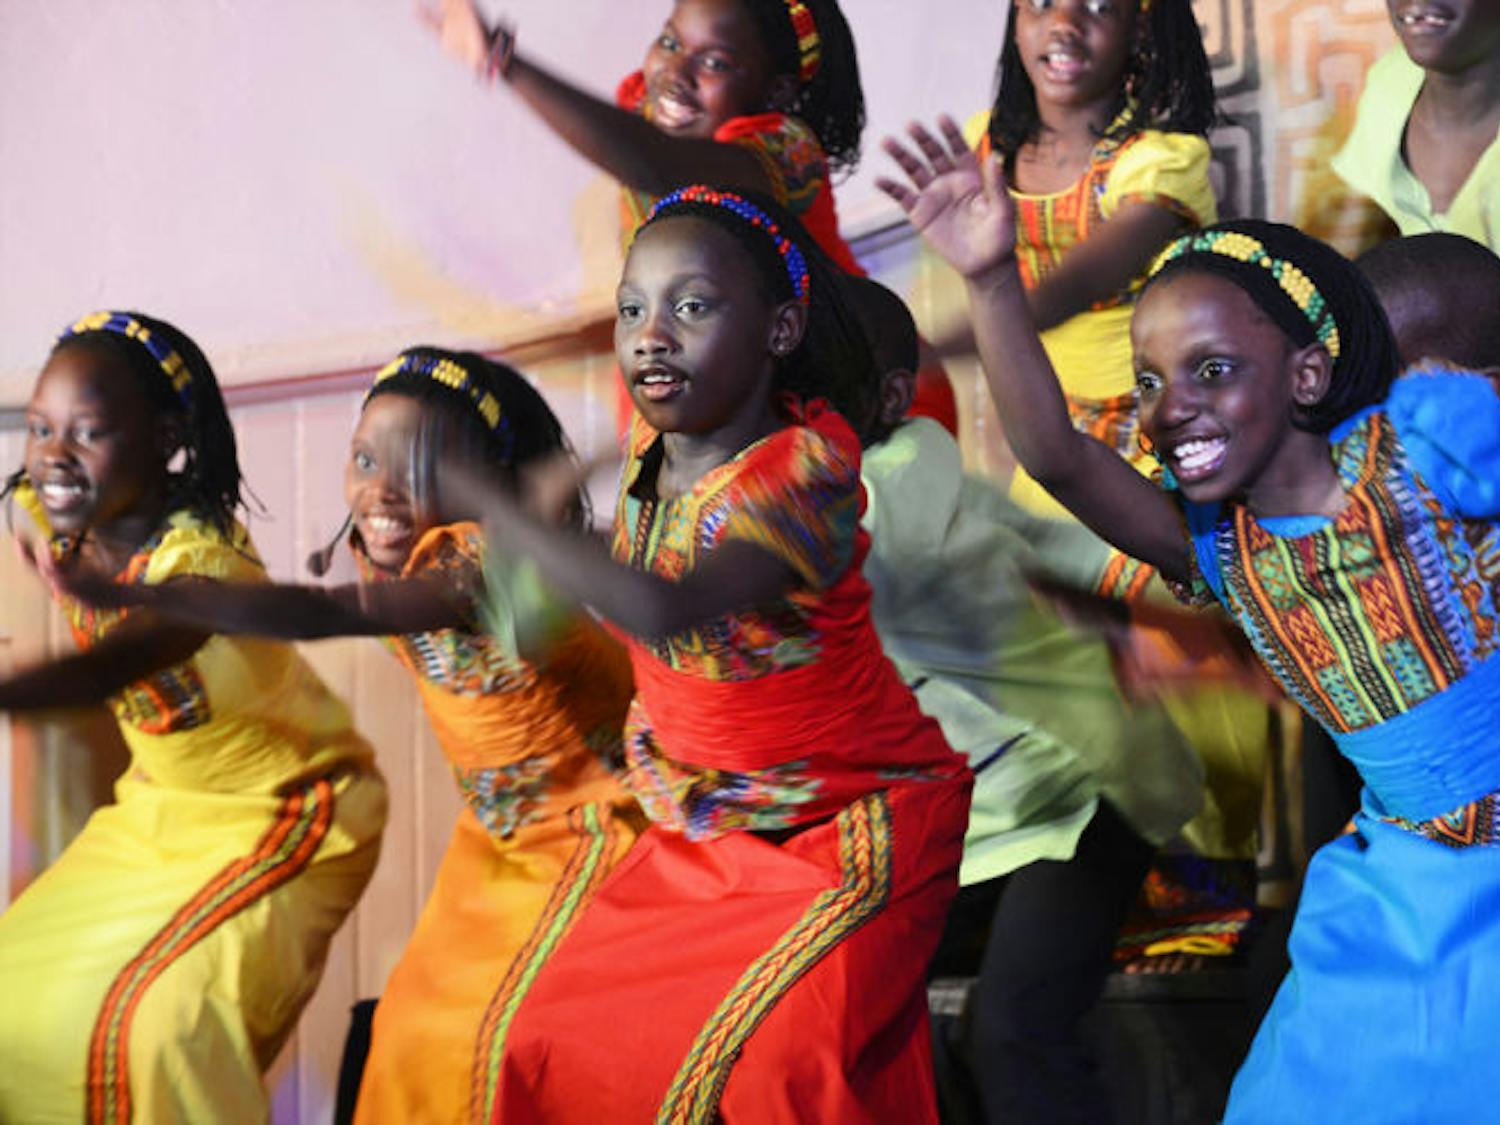 The Watoto Children’s Choir sing and dance Thursday night at the Mt. Pleasant United Methodist Church, located at 630 NW Second St.